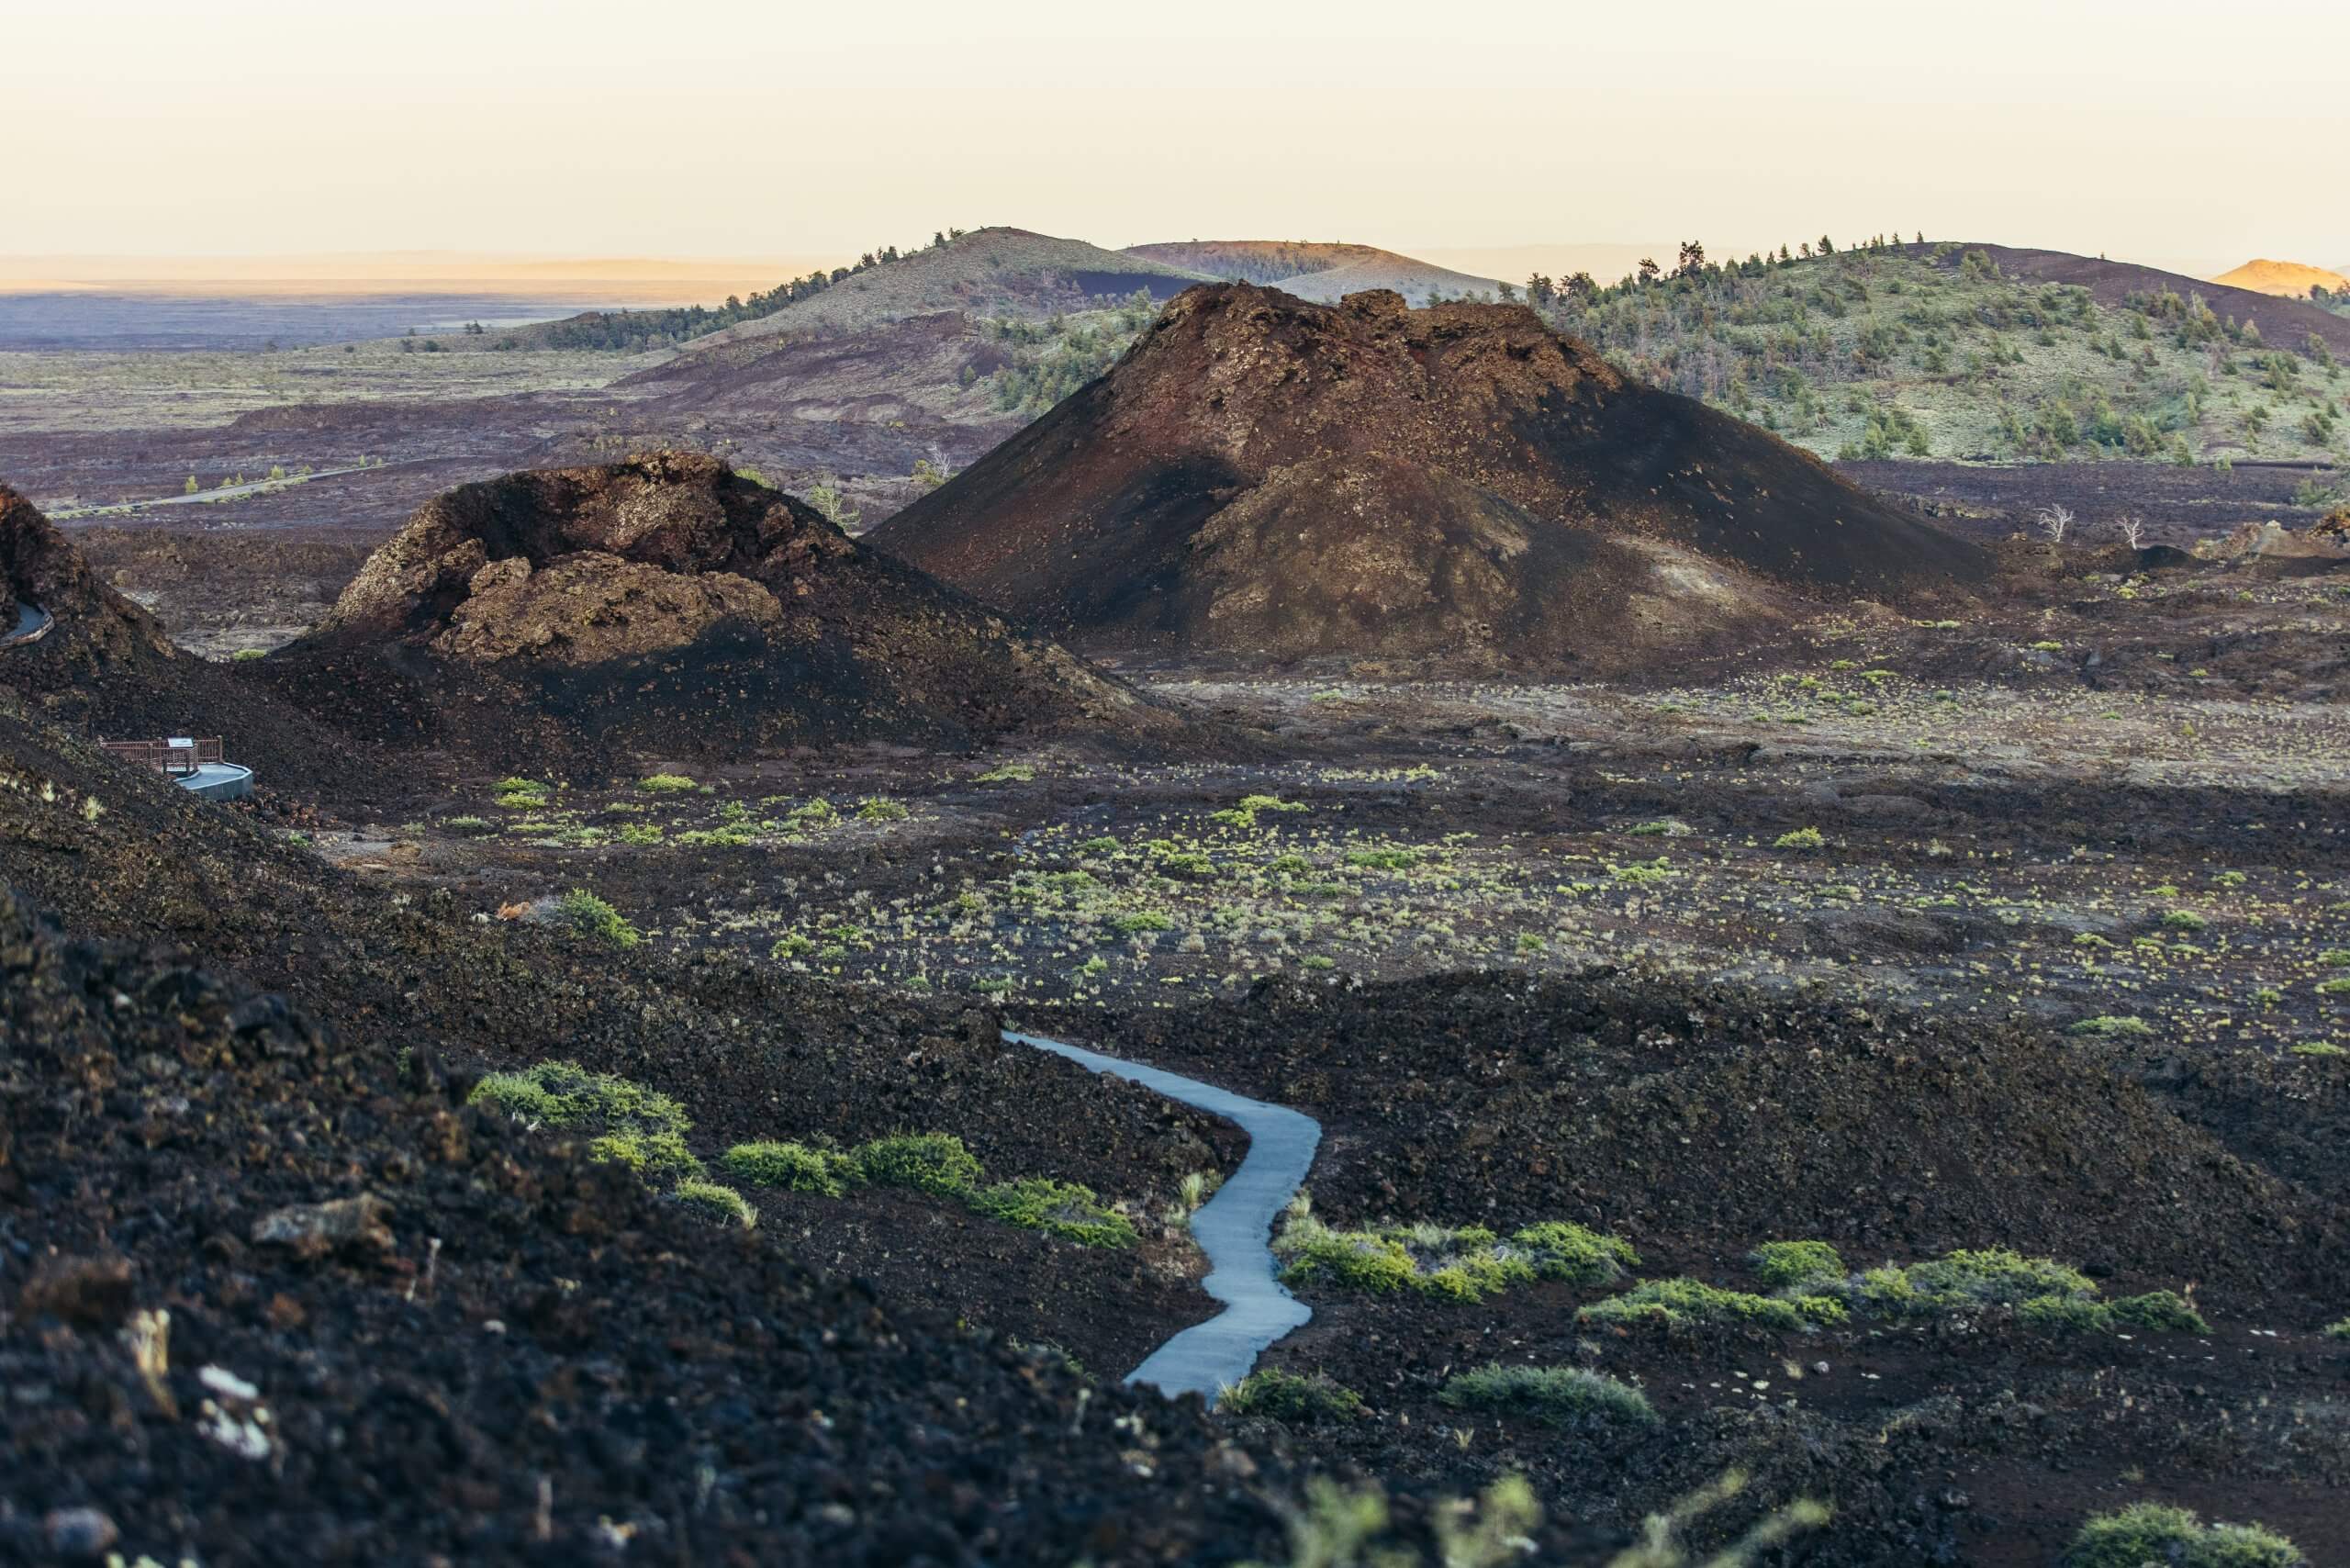 Scenic shot of the North Crater Trail in Craters of the Moon National Monument